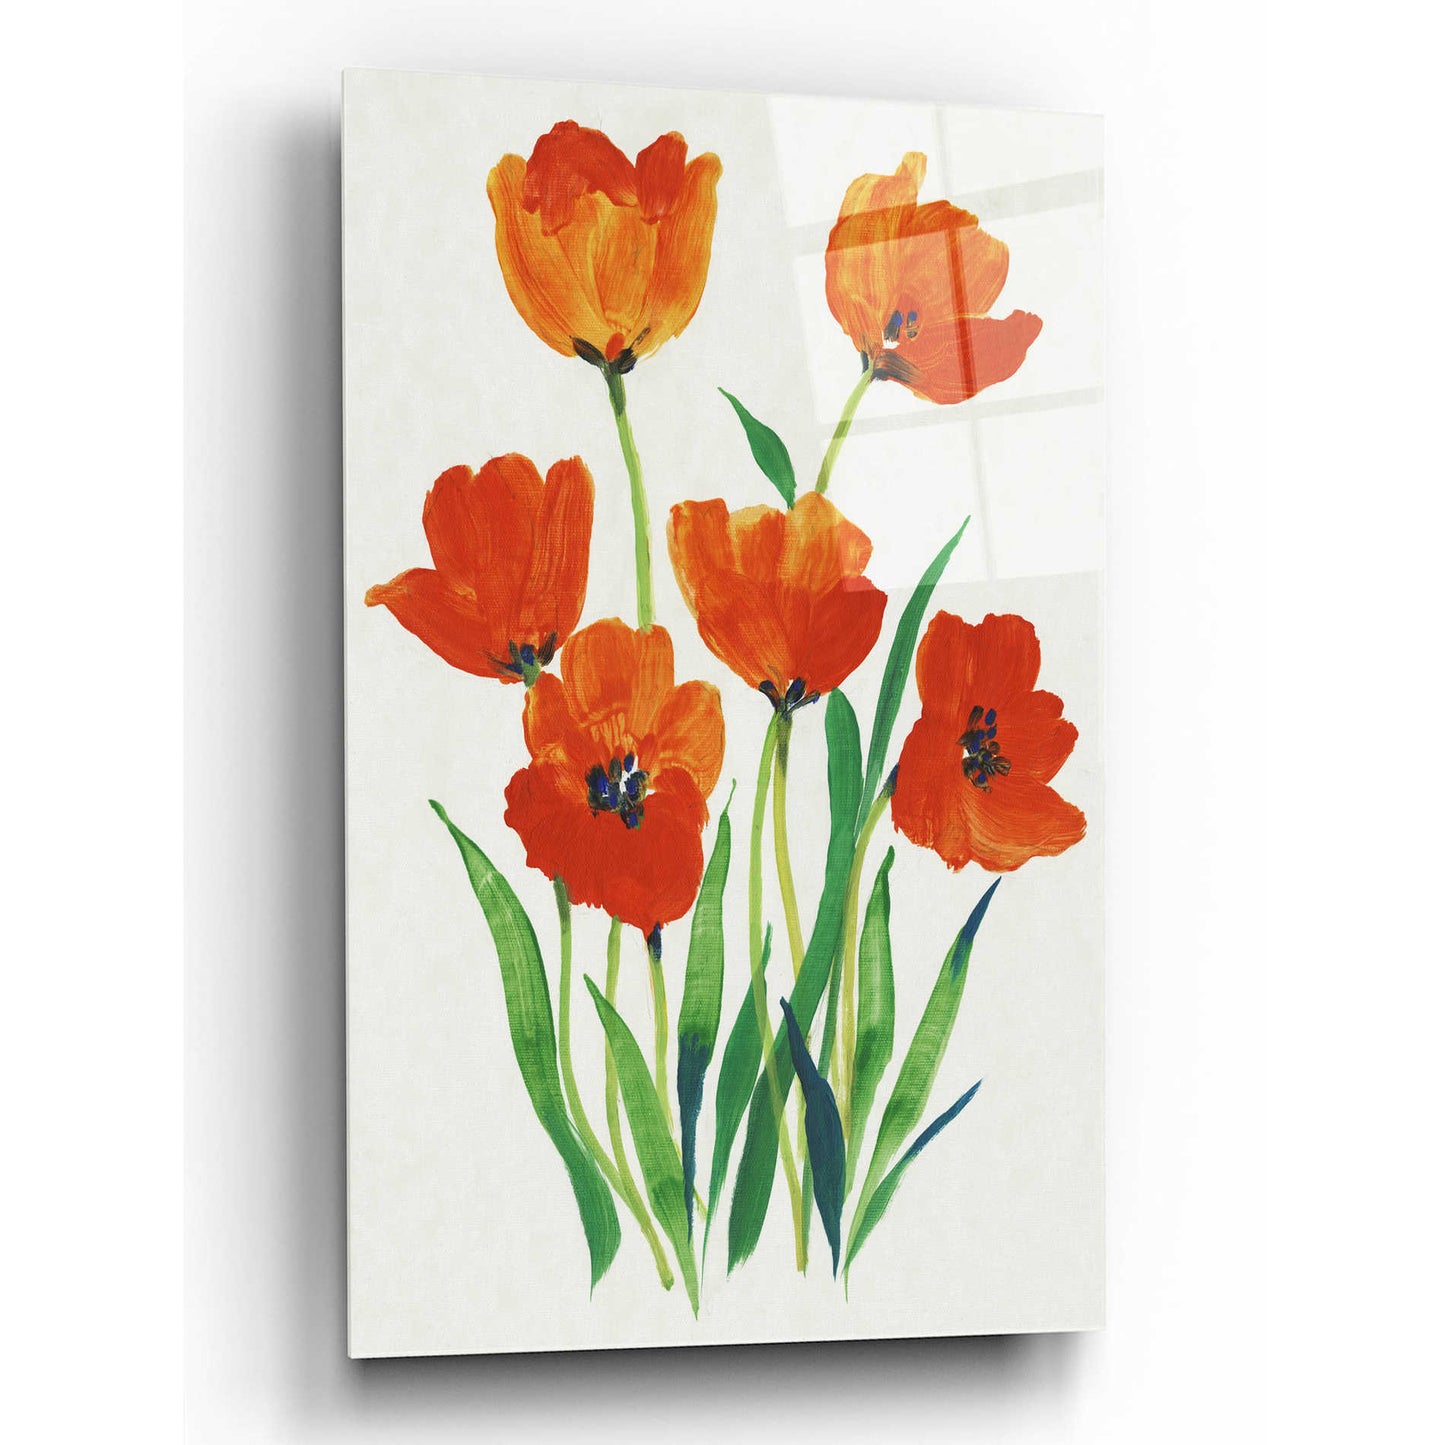 Epic Art 'Red Tulips in Bloom I' by Tim O'Toole, Acrylic Glass Wall Art,12x16